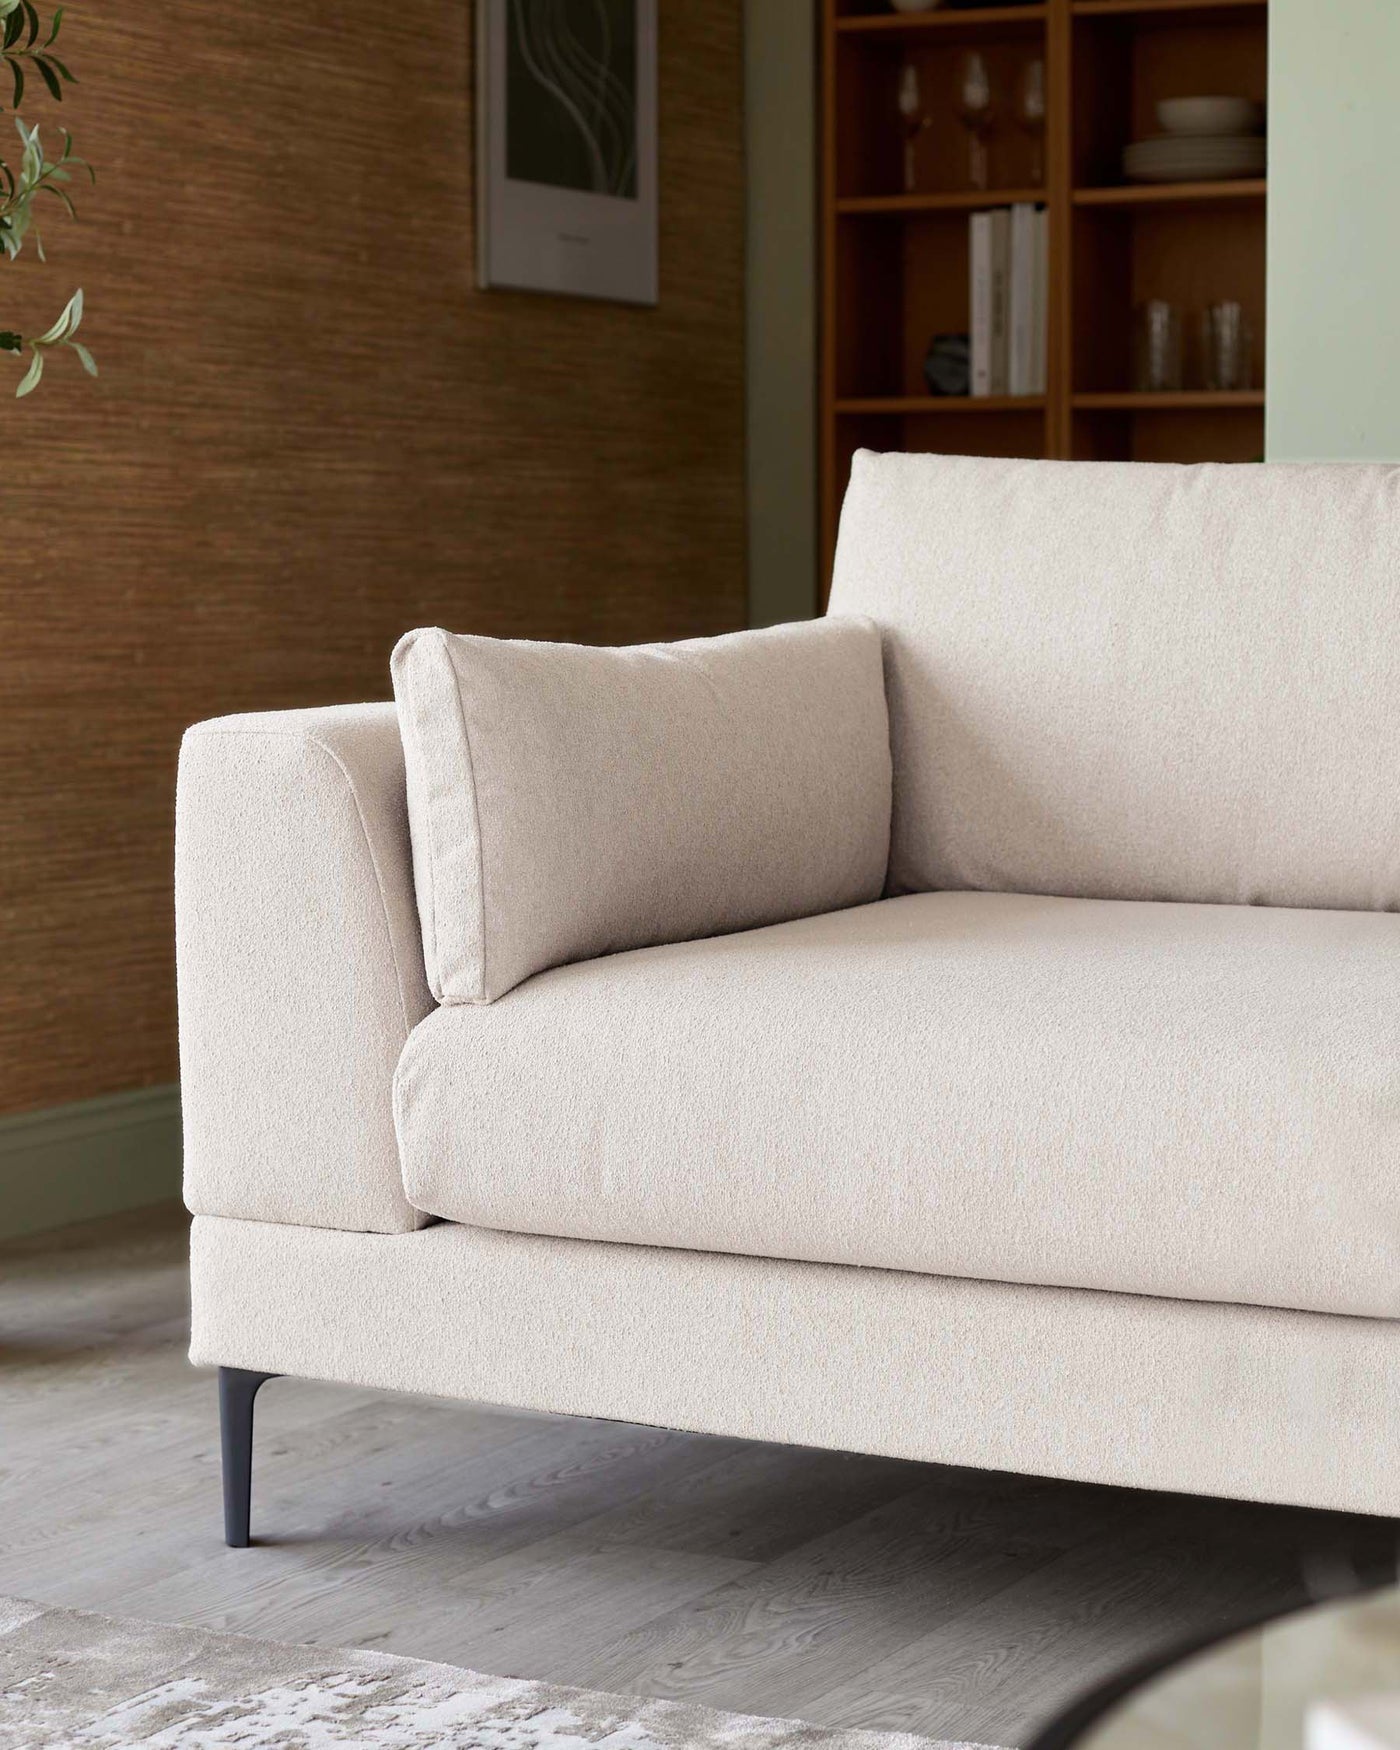 Modern light beige three-seater sofa with a minimalist design, featuring clean lines, a single seat cushion, two back cushions, and slender metal legs. A wooden bookshelf with compartments, some filled with dinnerware and decorative items, is visible in the background.